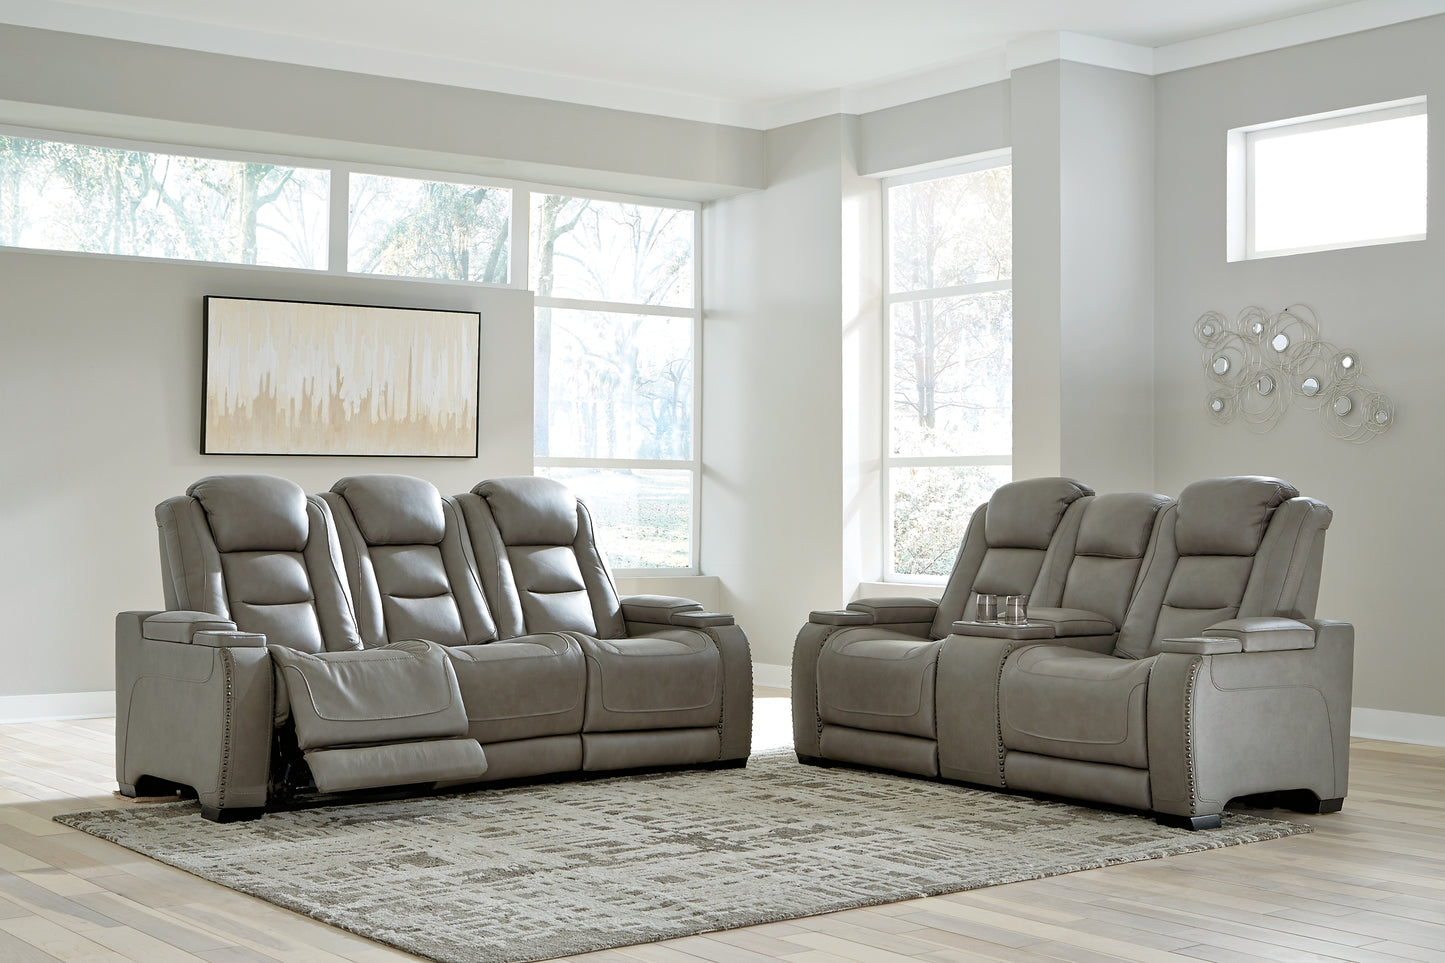 The Man-Den Sofa and Loveseat JB's Furniture  Home Furniture, Home Decor, Furniture Store